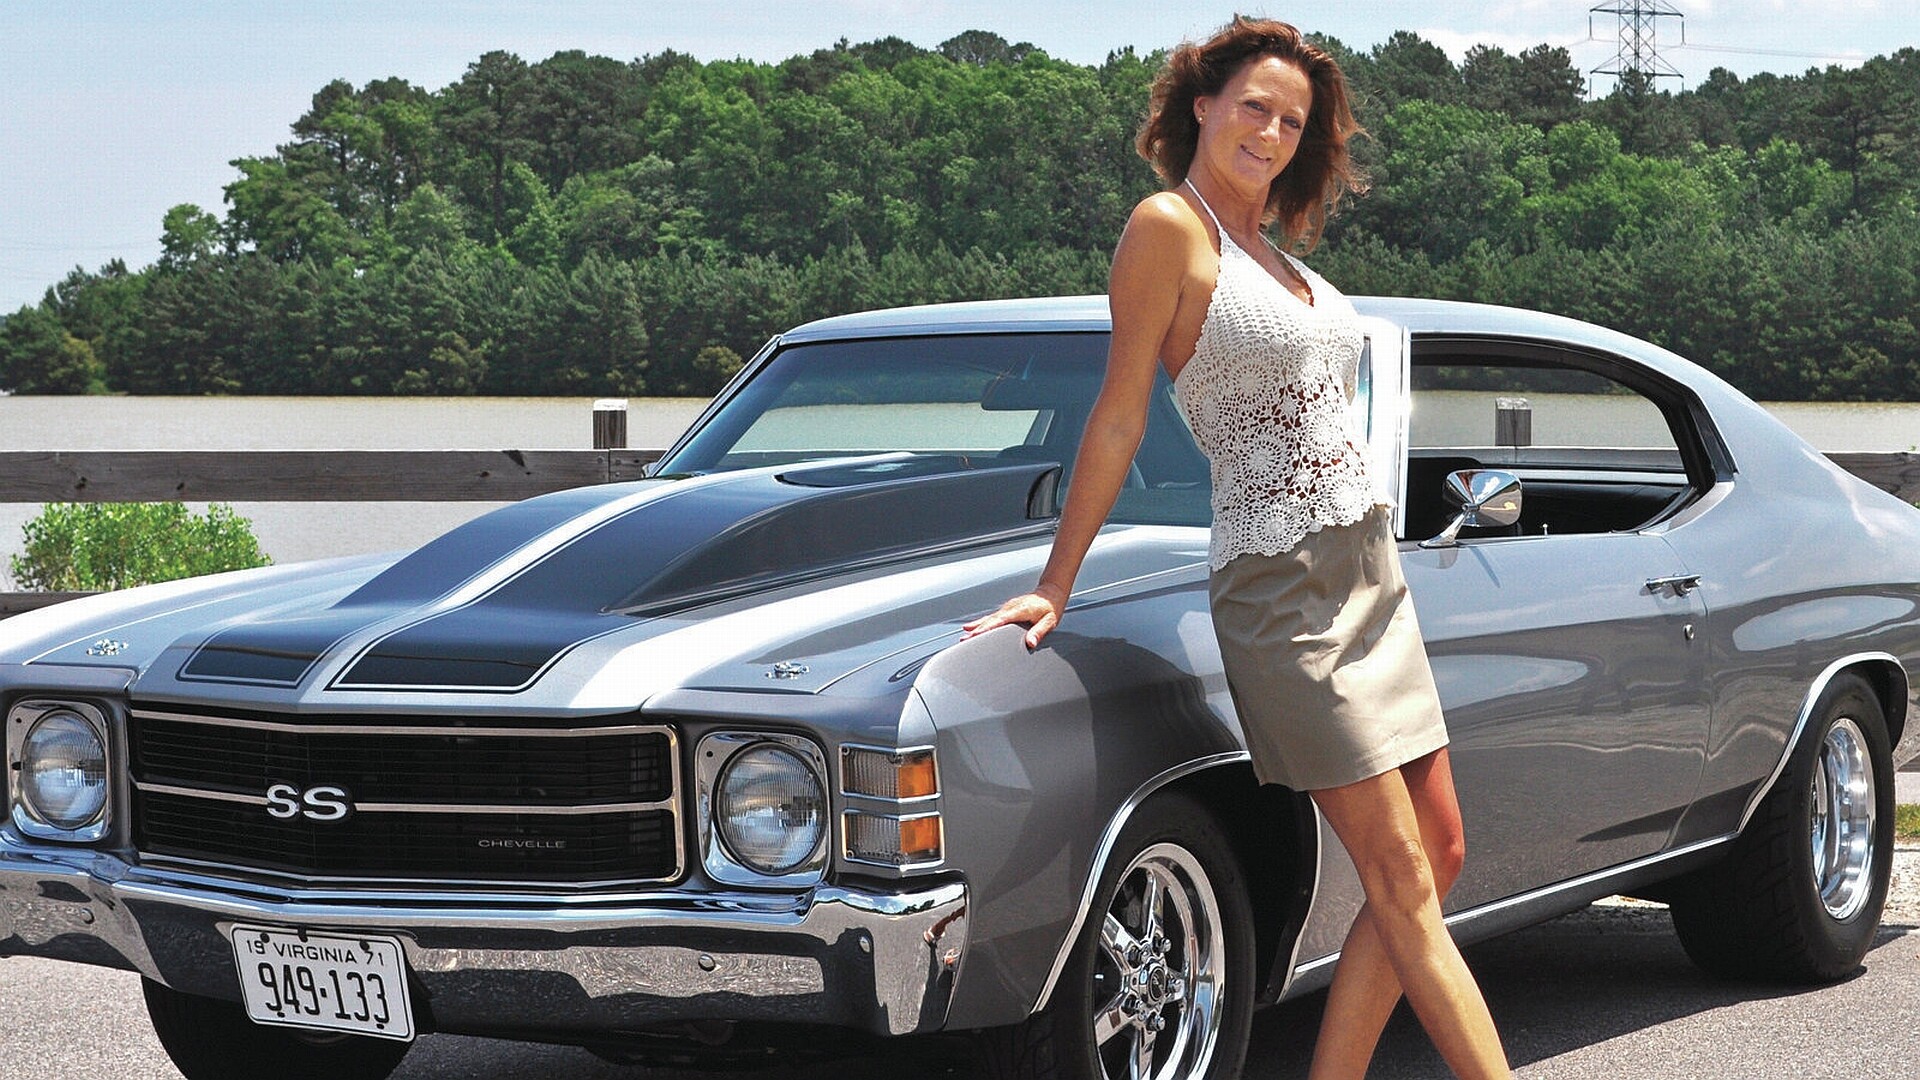 Girls and Muscle Cars: The Chevrolet Chevelle SS, A mid-sized automobile produced by the Chevrolet, Retro cars. 1920x1080 Full HD Wallpaper.